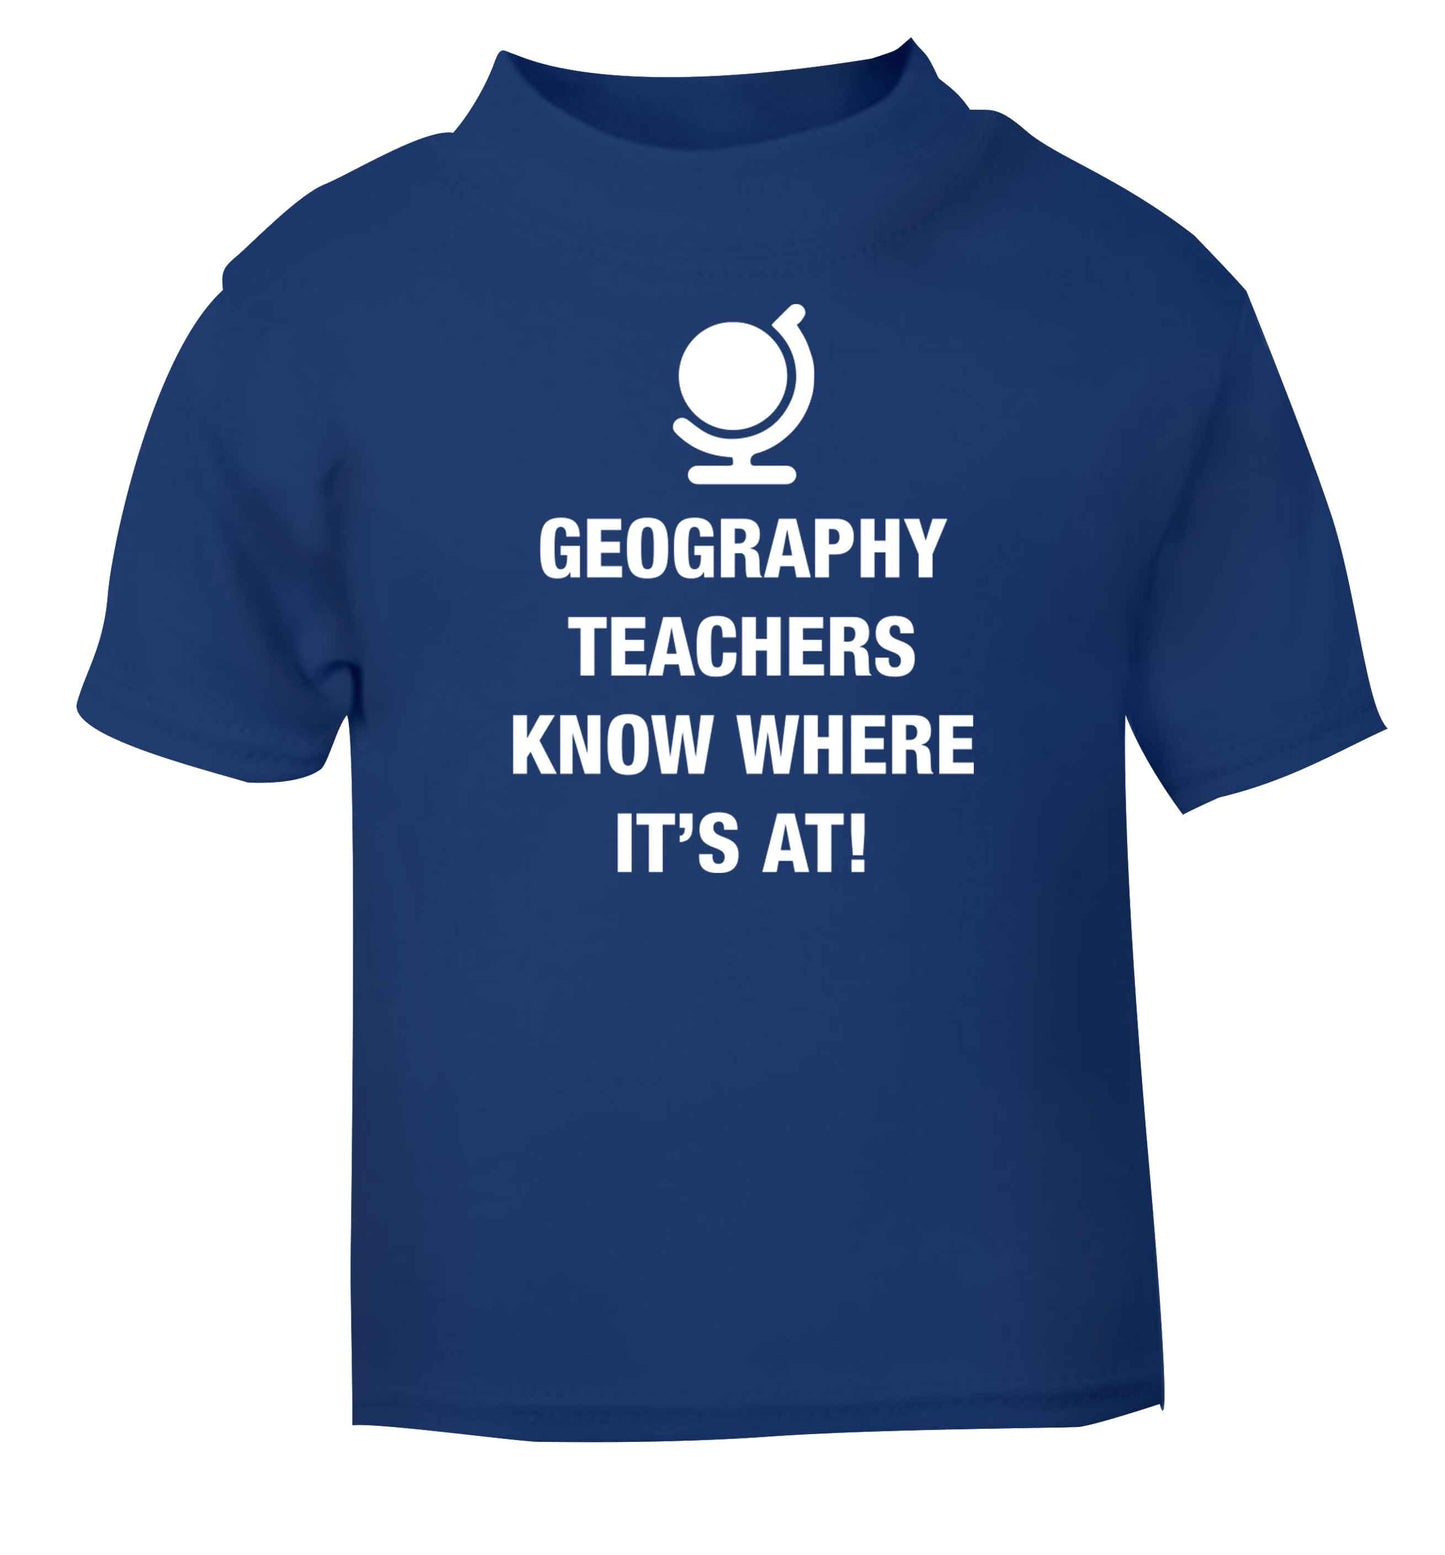 Geography teachers know where it's at blue baby toddler Tshirt 2 Years